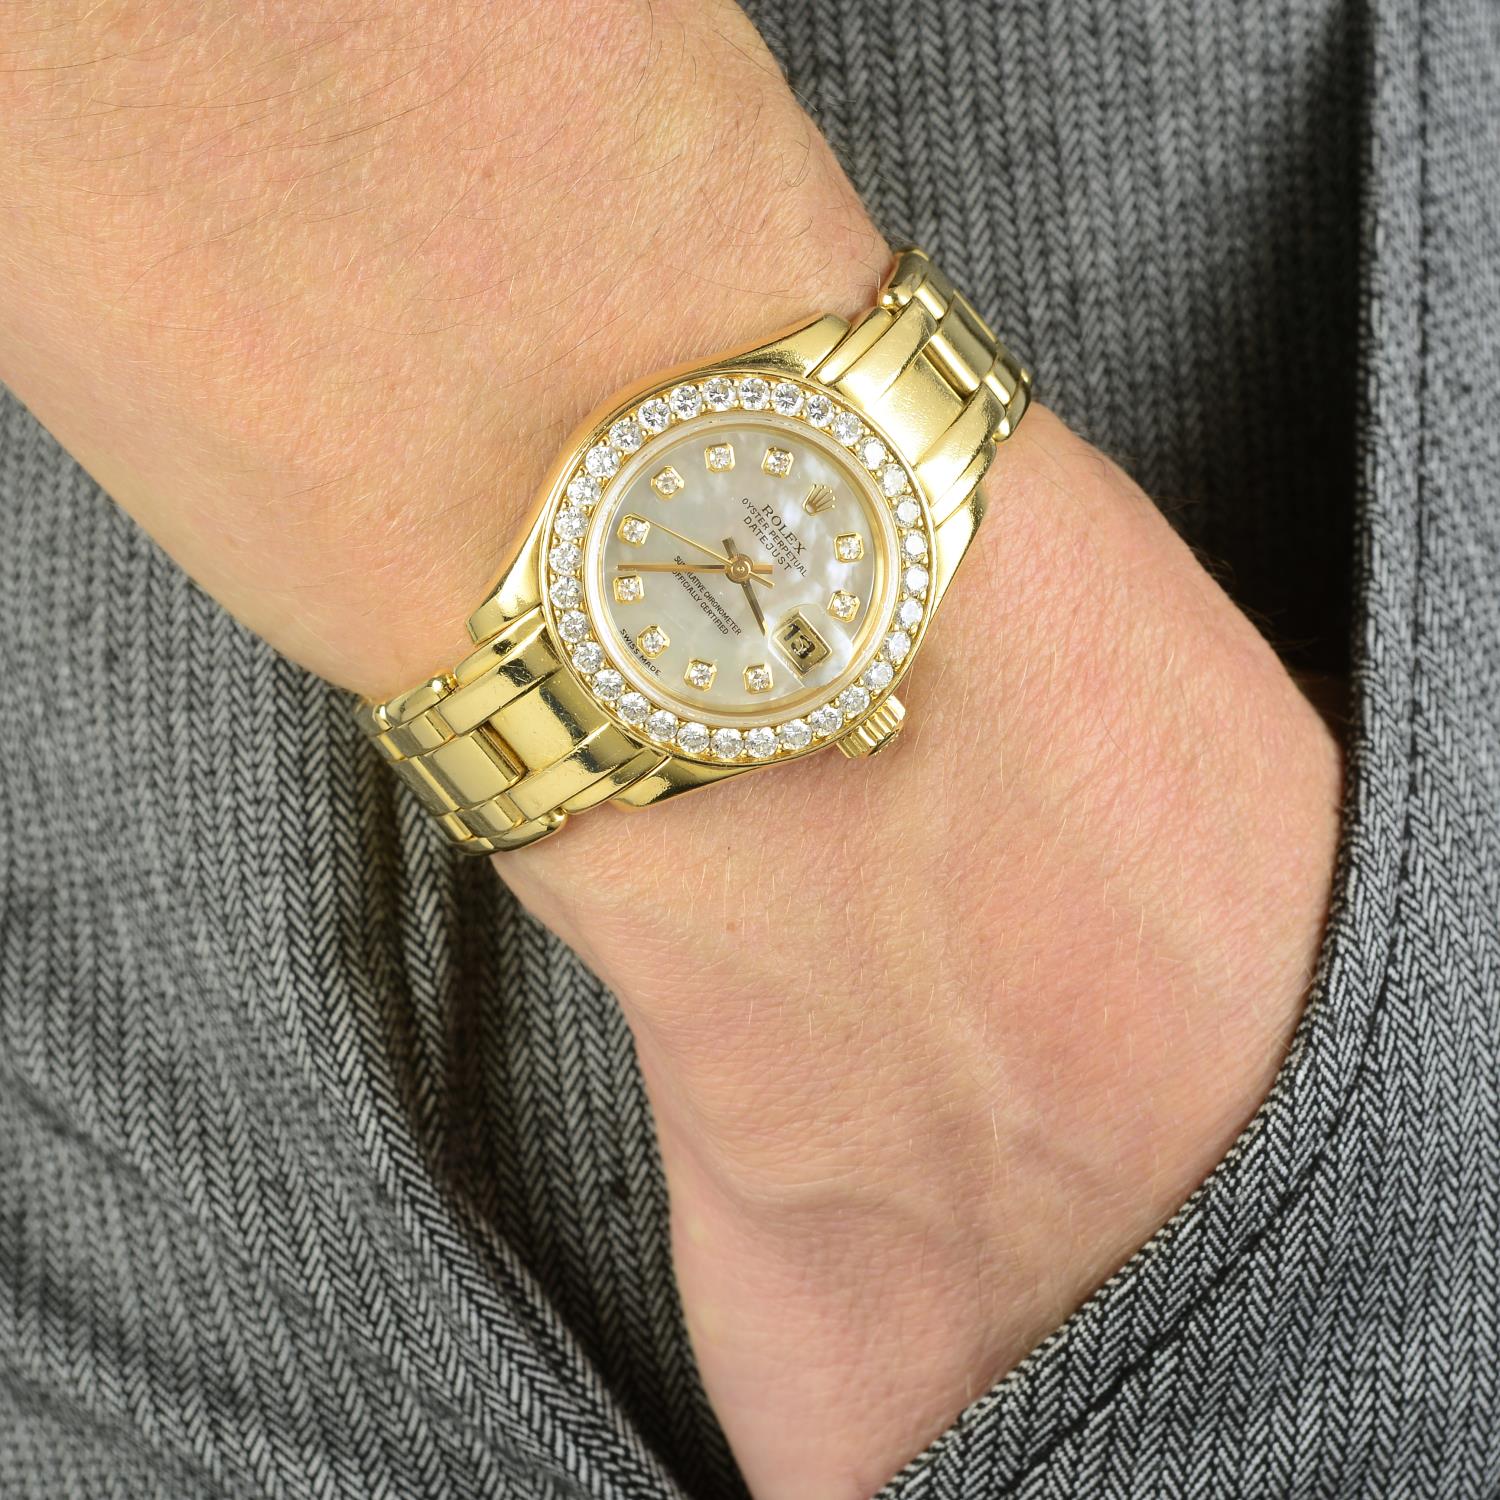 ROLEX - a lady's Oyster Perpetual Datejust Pearlmaster bracelet watch. - Image 3 of 3